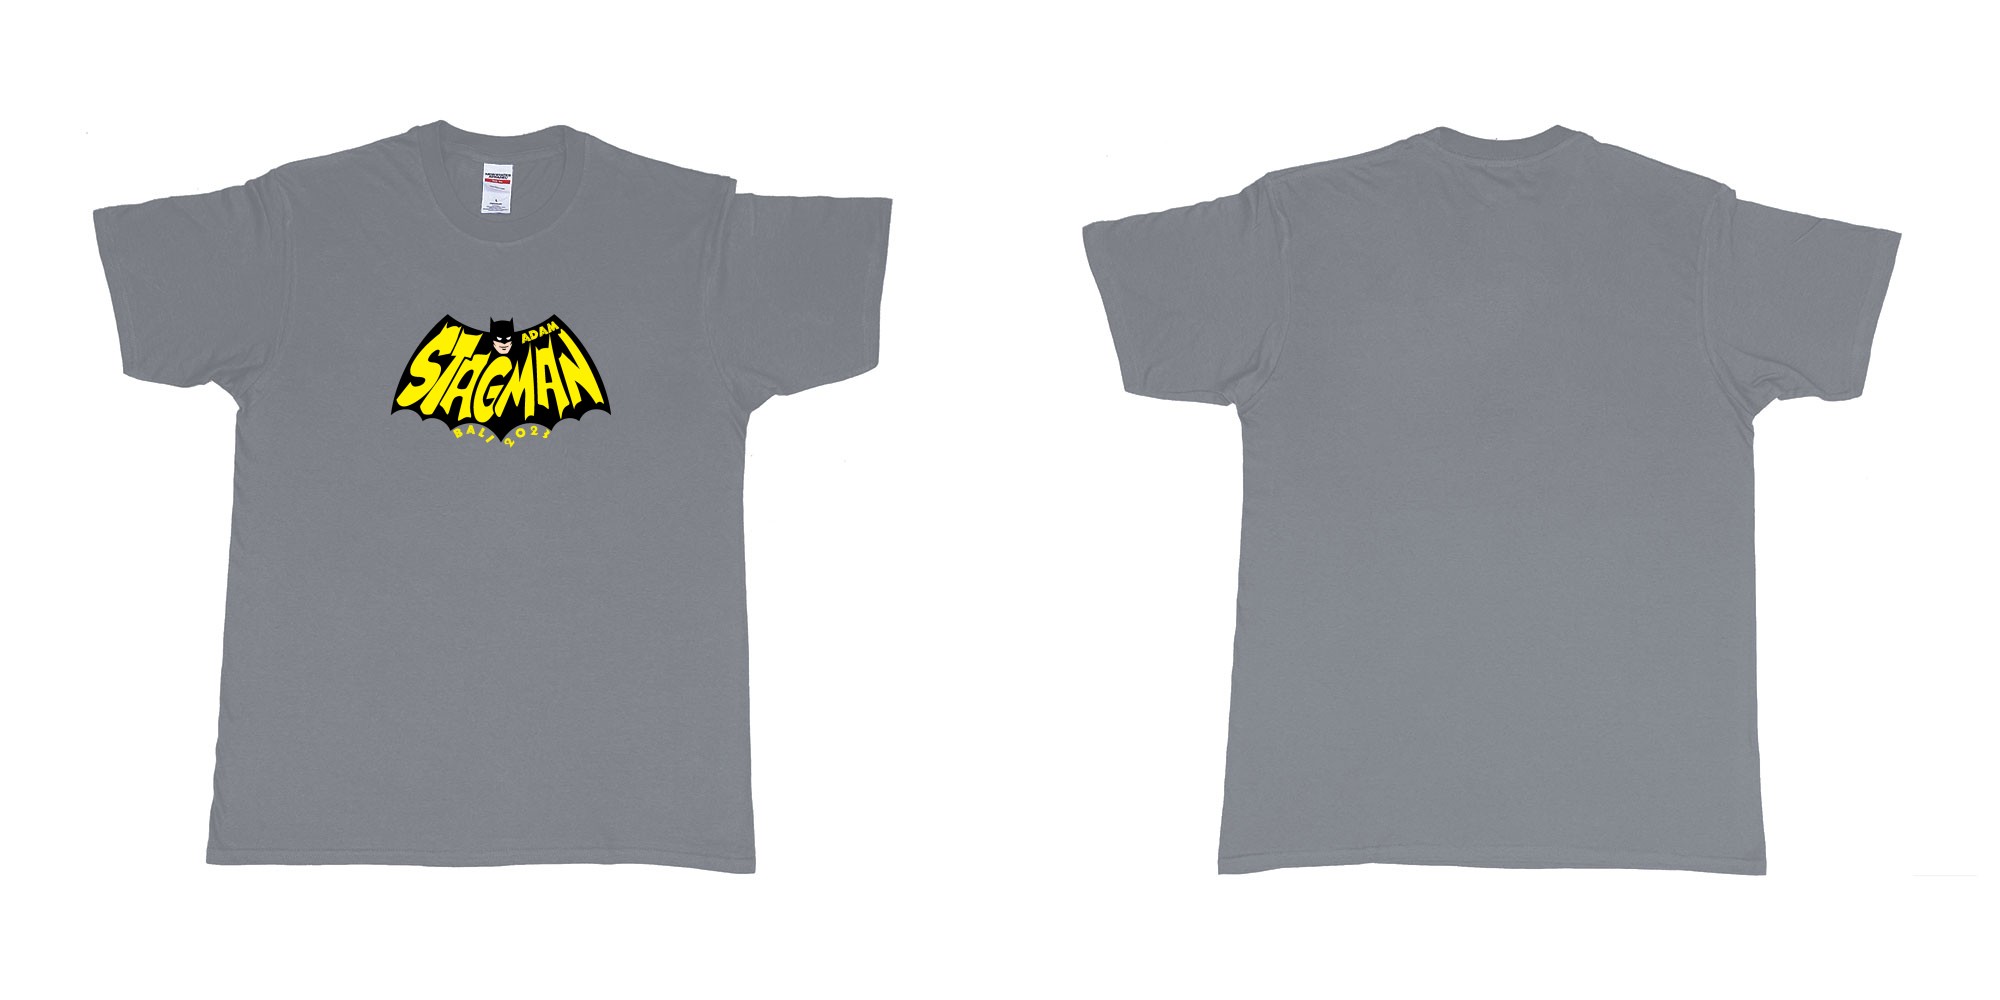 Custom tshirt design Batman StagMan Old School in fabric color misty choice your own text made in Bali by The Pirate Way